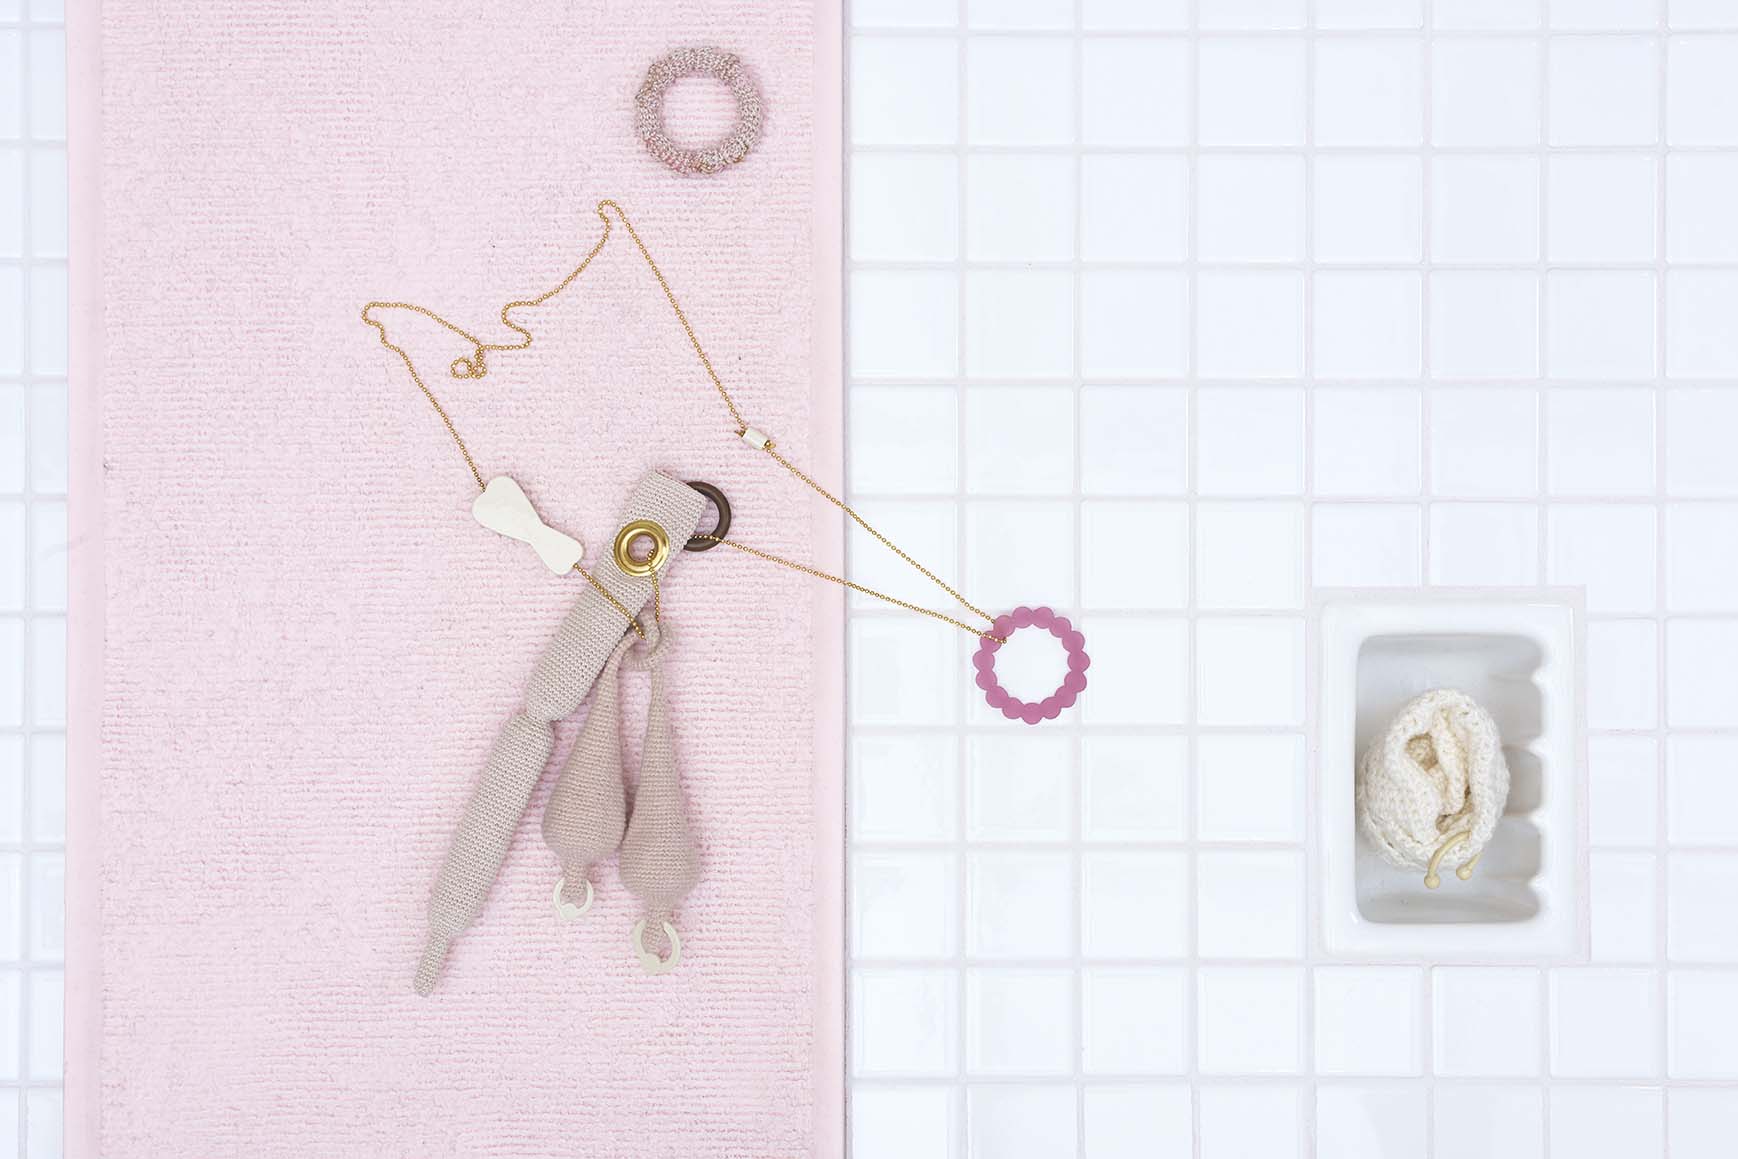 Tatum Gentry, Expert from Expert of a Bathroom, 2019, Necklace and Sock, yarn, brass, aluminum, powder coating, rubber o-ring, plexiglass, 18k plated ball chain, 22 x 5 x 3 inches, Photo : Carlson Productions 